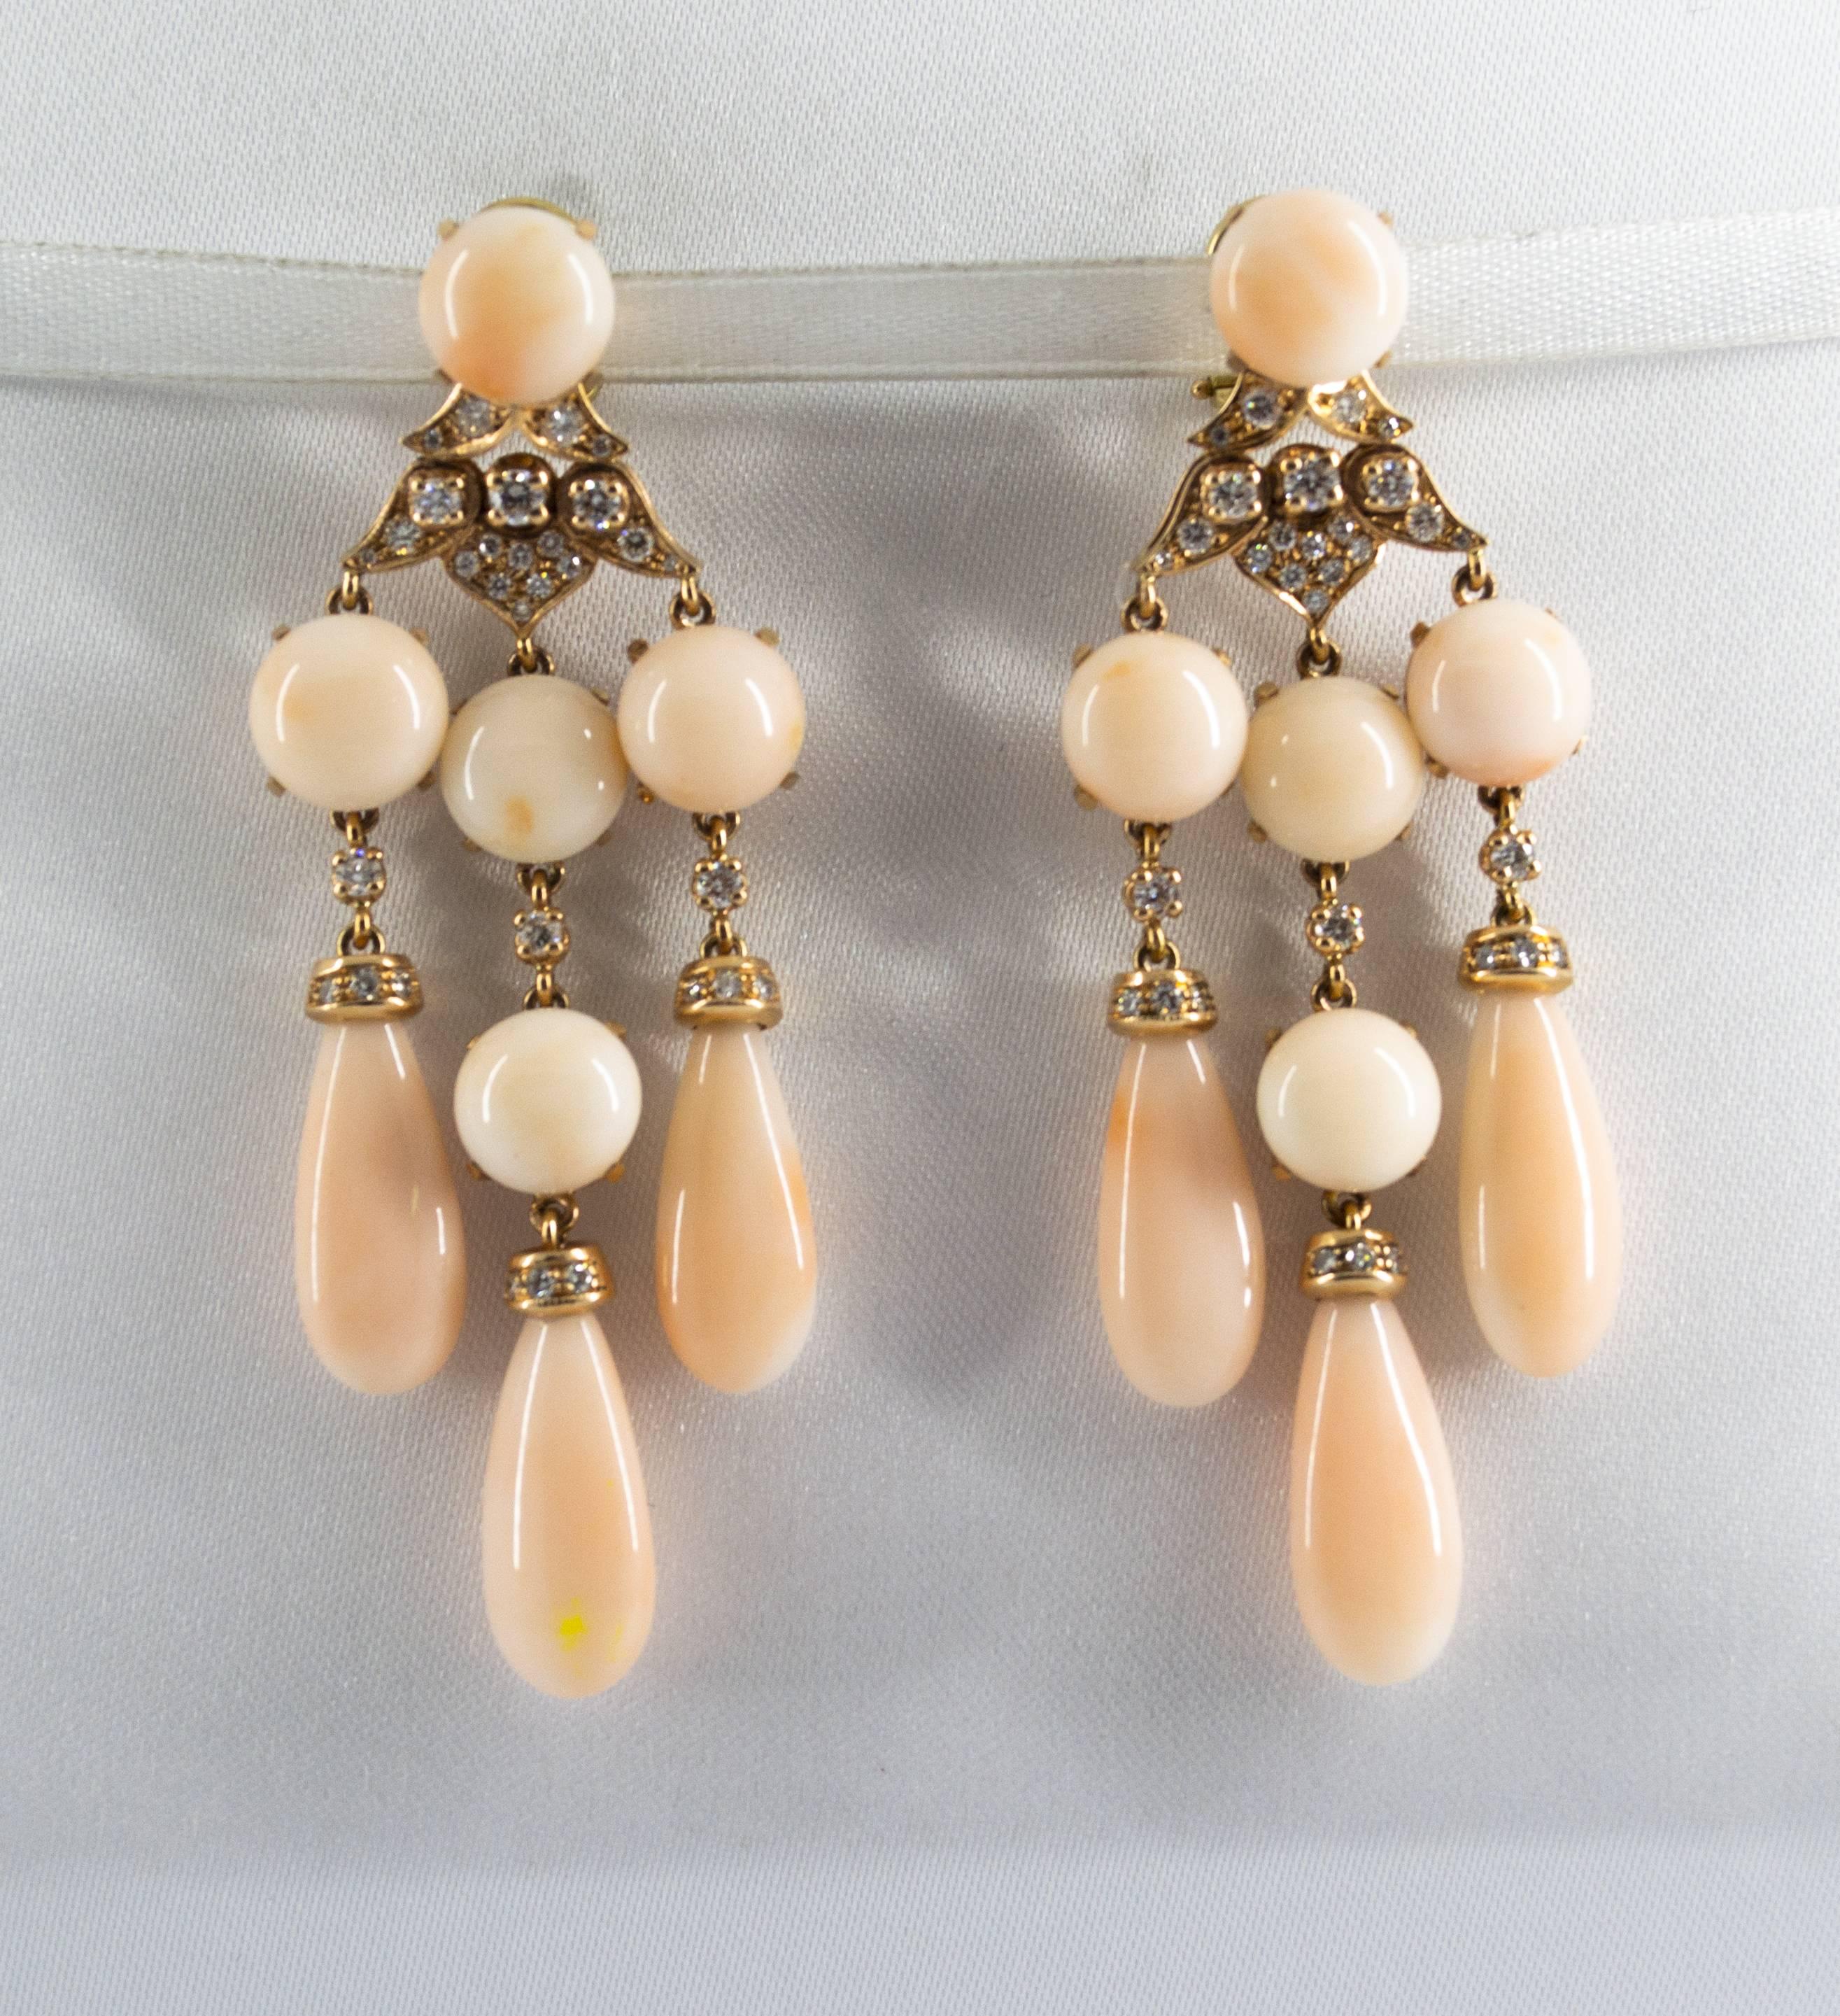 These Earrings are made of 14K Yellow Gold.
These Earrings have 1.25 Carats of White Diamonds.
These Earrings have also Pink Coral.
All our Earrings have pins for pierced ears but we can change the closure and make any of our Earrings suitable even